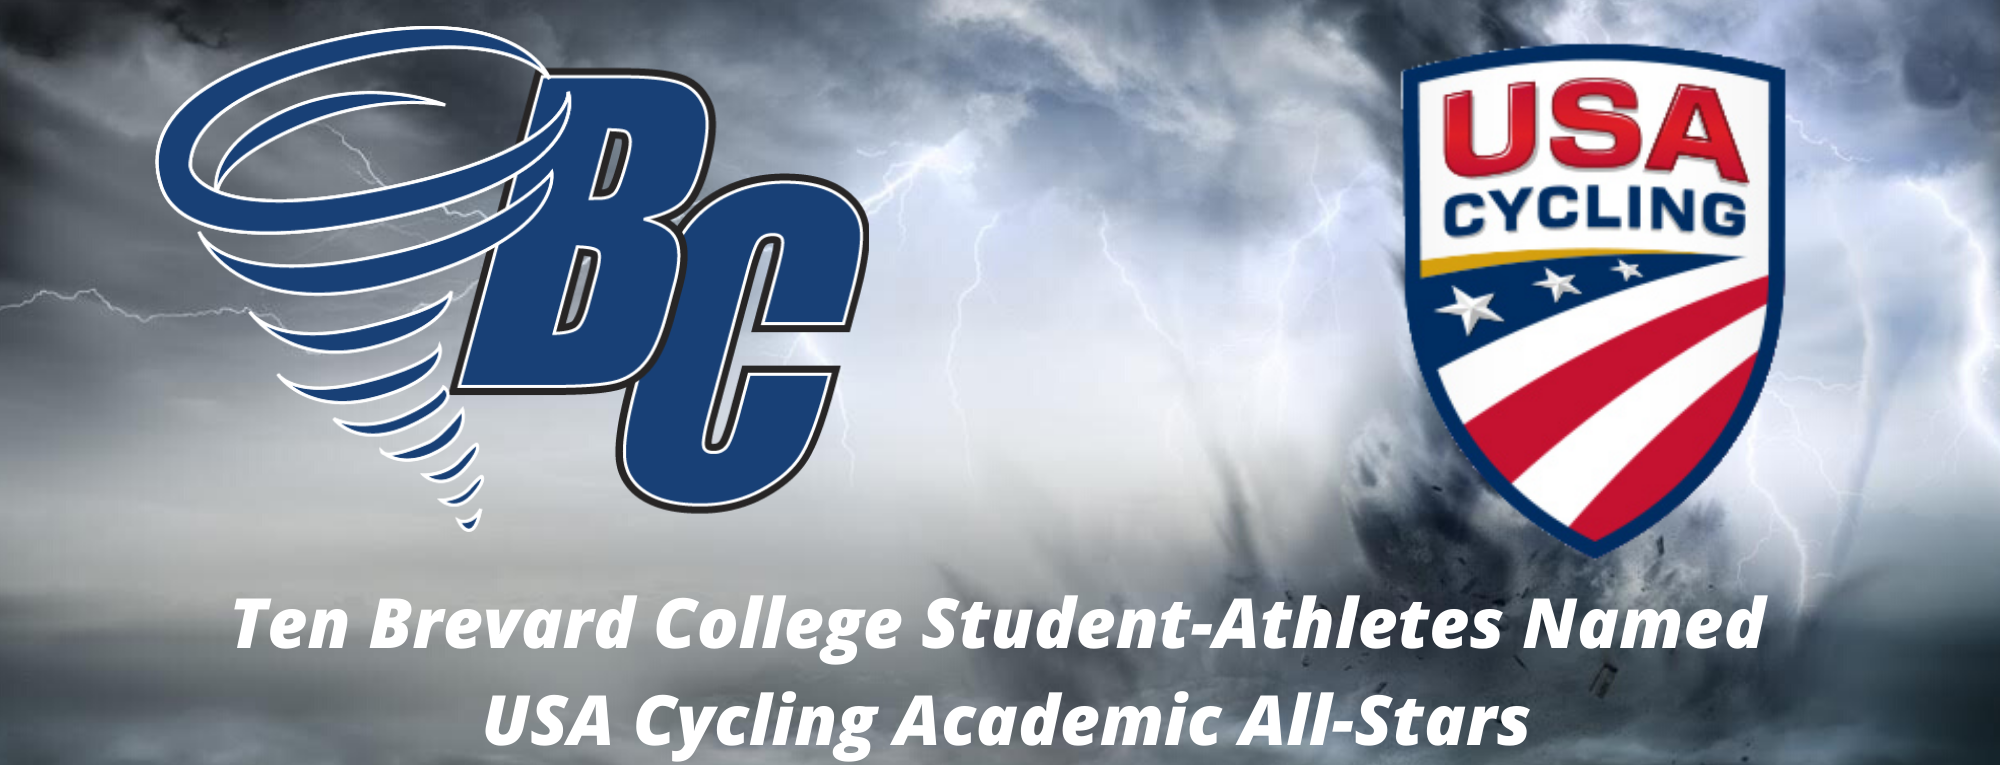 Ten Brevard College Student-Athletes Named USA Cycling Academic All-Stars